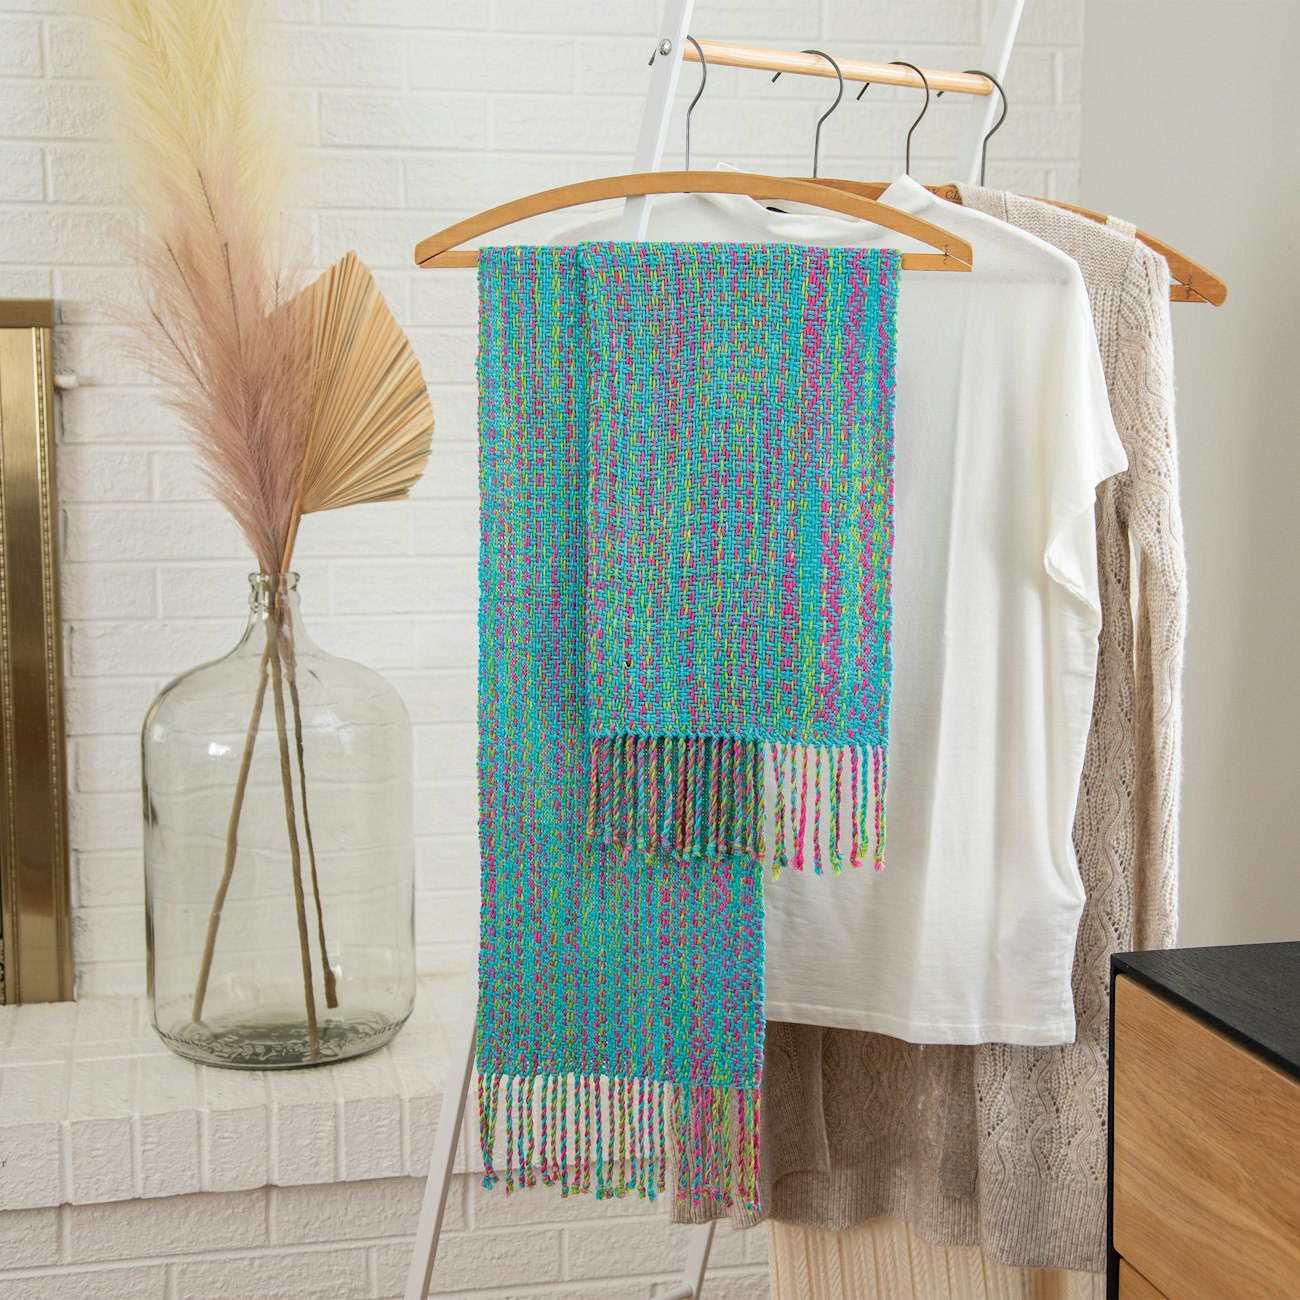 Spring Fling Scarf by Nancy Peck from Little Looms Spring 2022. Photo by Matt Graves